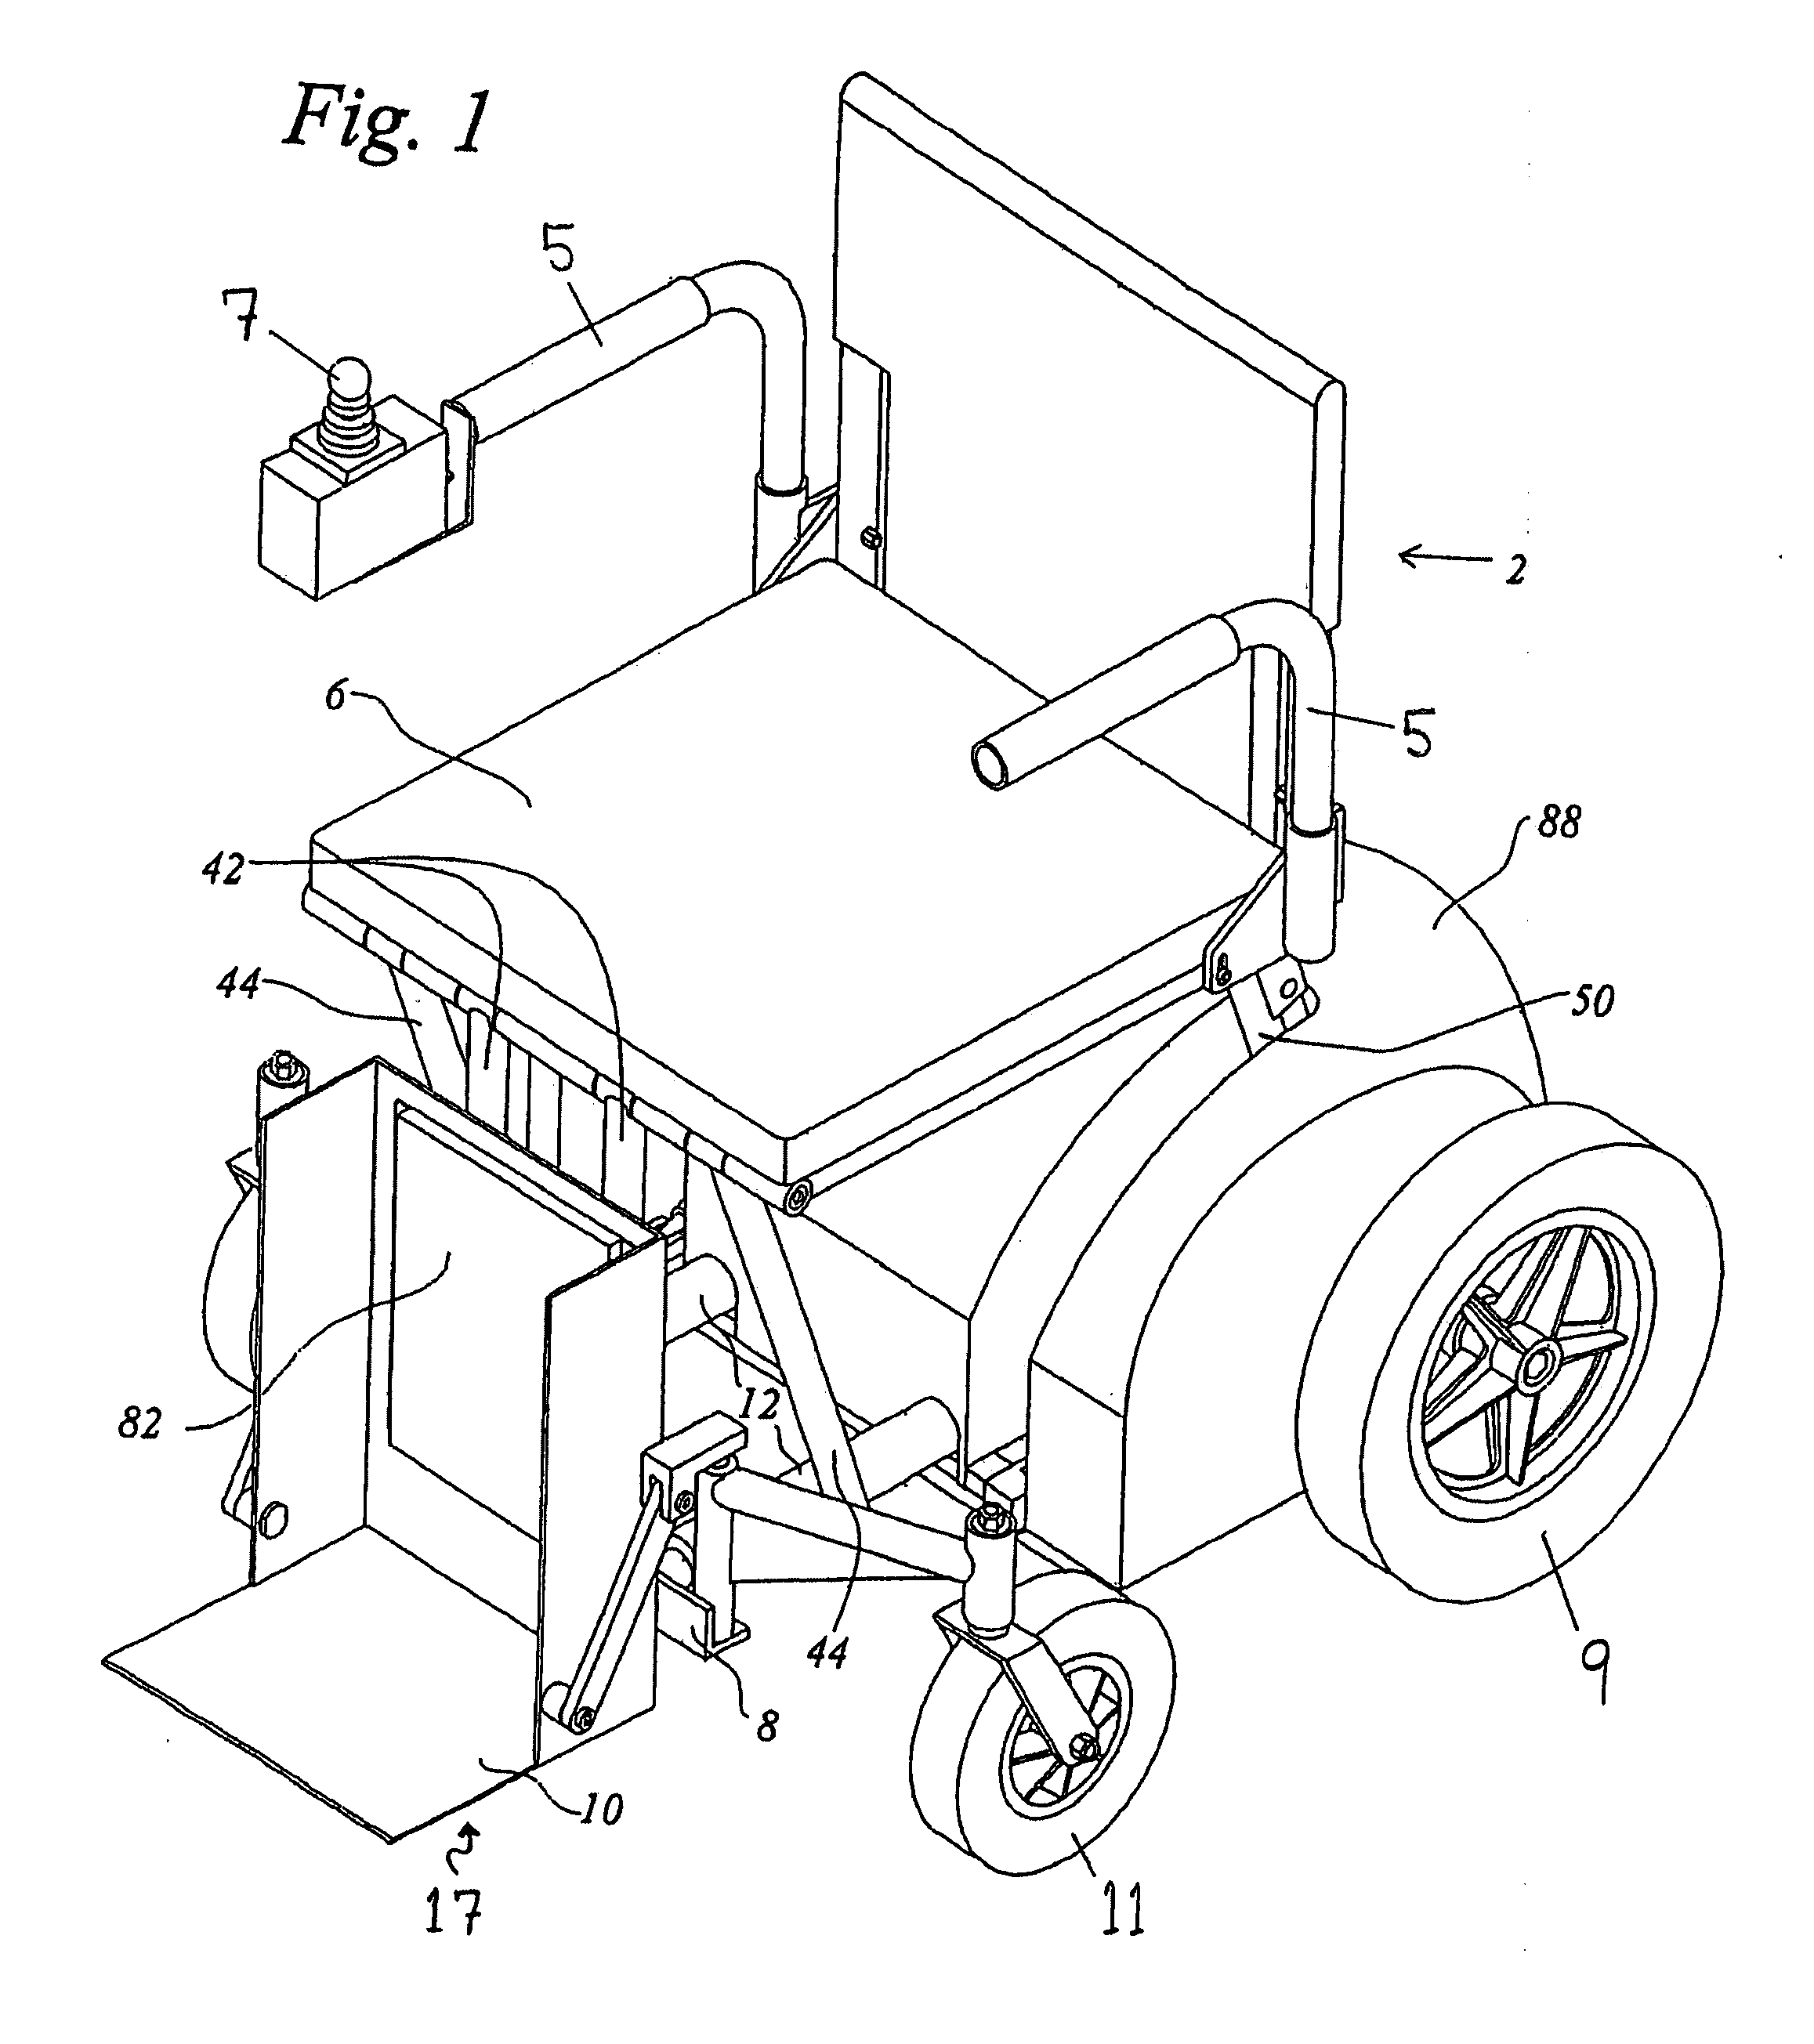 Stabilized Mobile Unit or Wheelchair